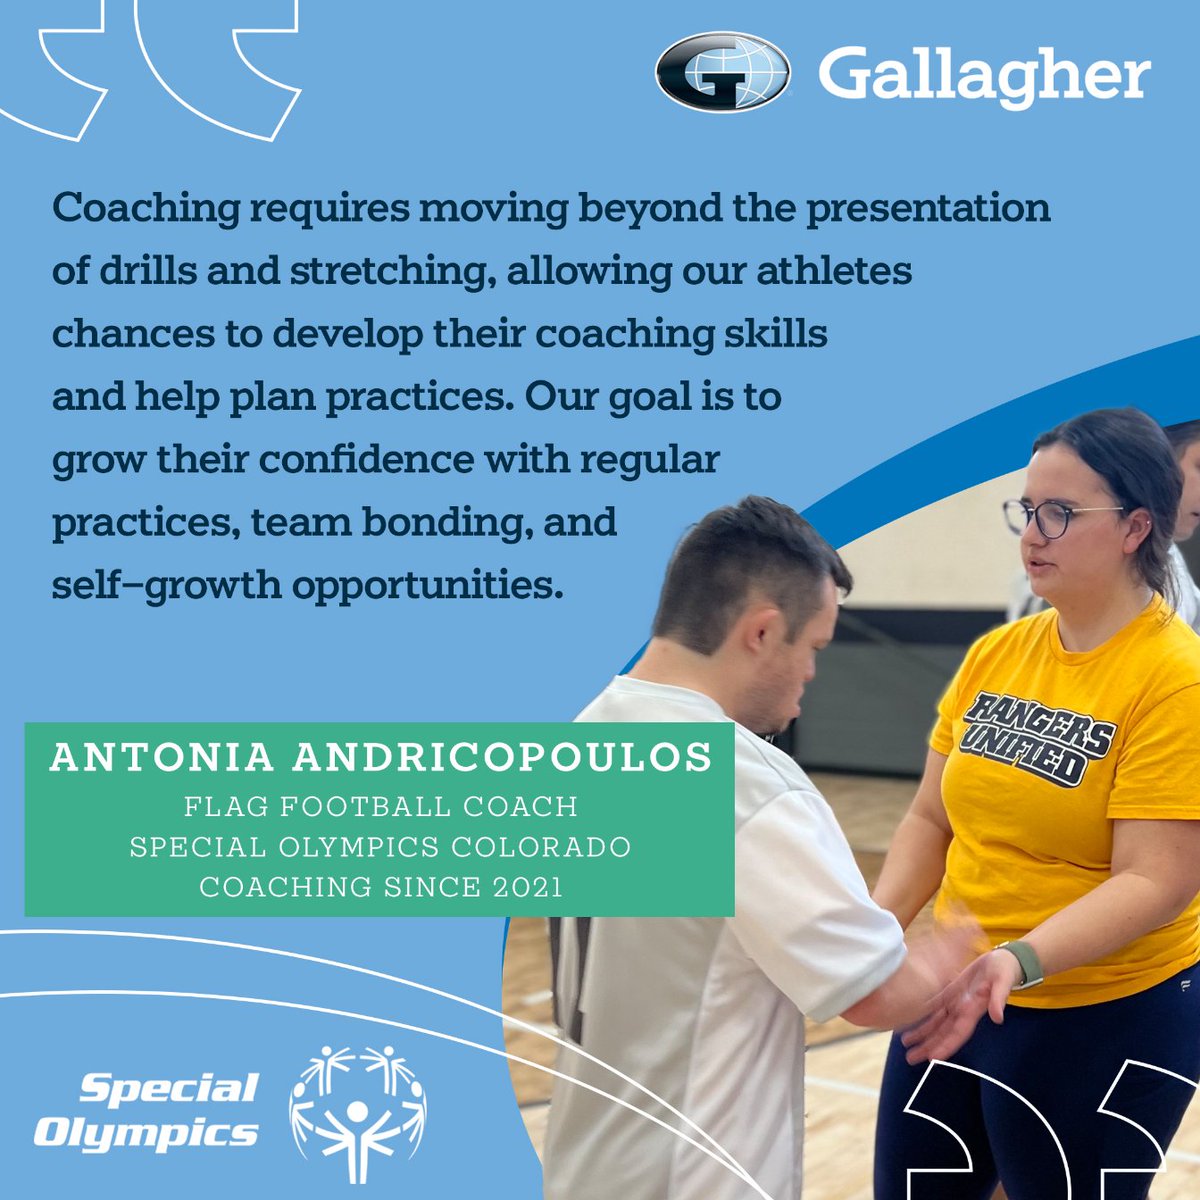 As the Official Partner of Special Olympics Sport and Coaching Programming, we’re proud to showcase some of the amazing individuals whose volunteer efforts form the backbone of this global organization. Antonia Andricopoulos has been a flag football coach for Special Olympics…